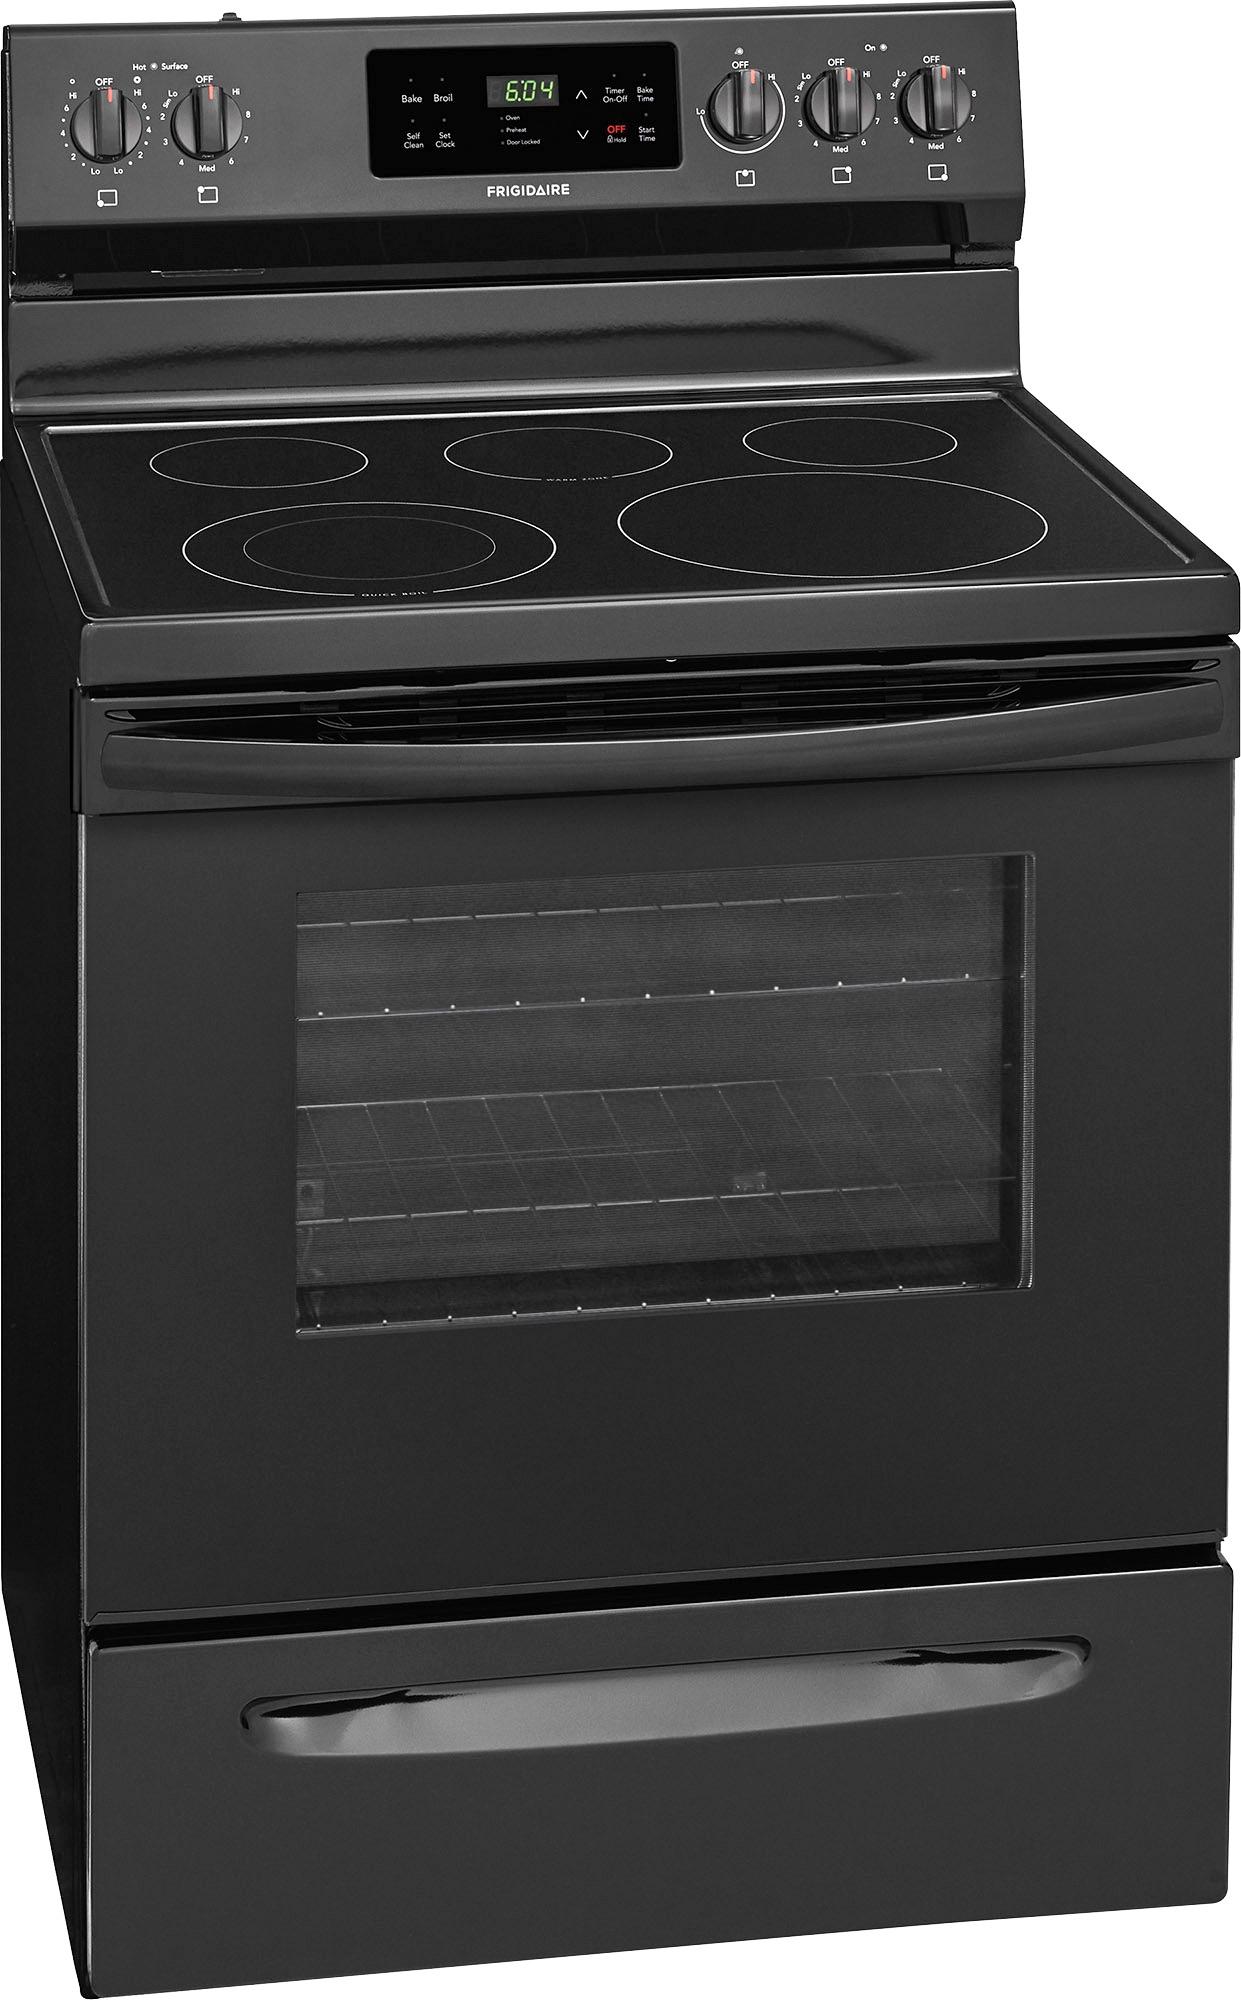 Angle View: Frigidaire - Gallery 30" Electric Induction Cooktop - Black